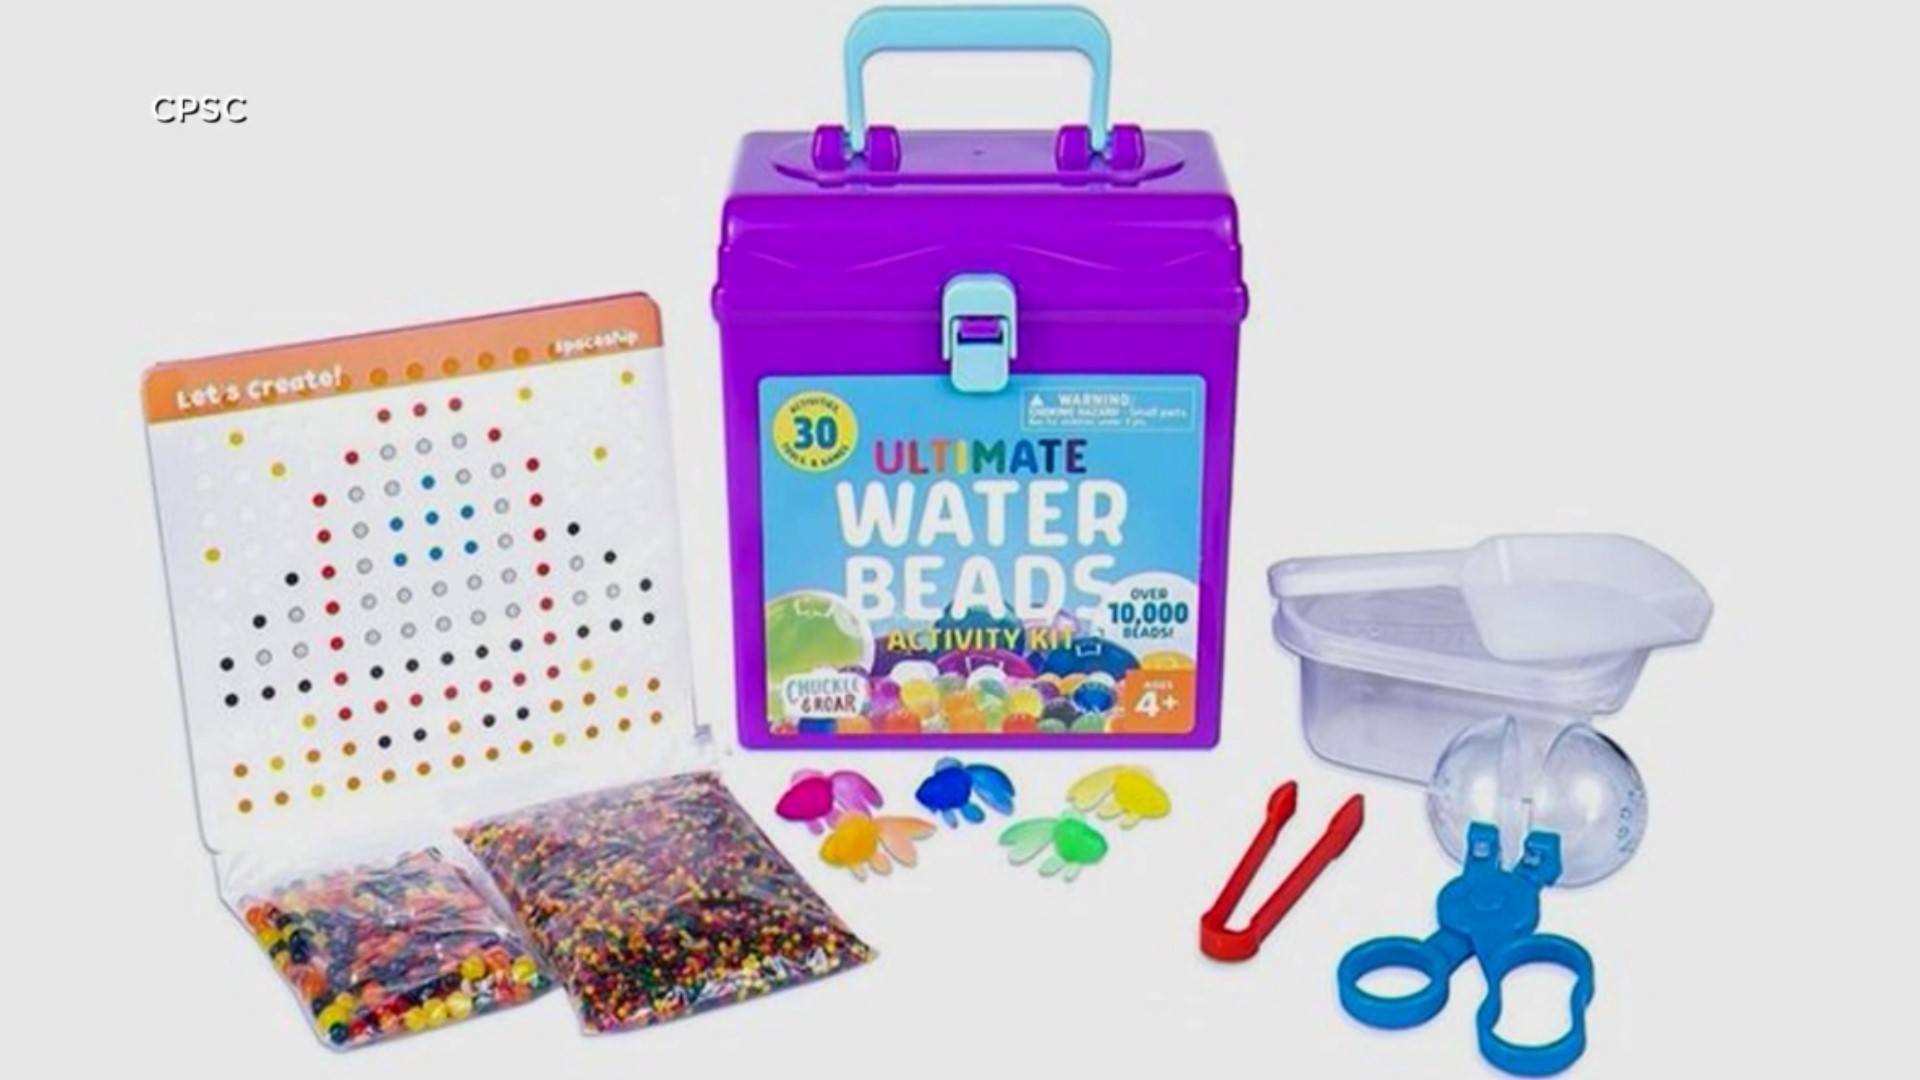 After a 10-month-old baby died from choking on this product, the Chuckle & Roar Ultimate Water Beads activity kit was recalled.